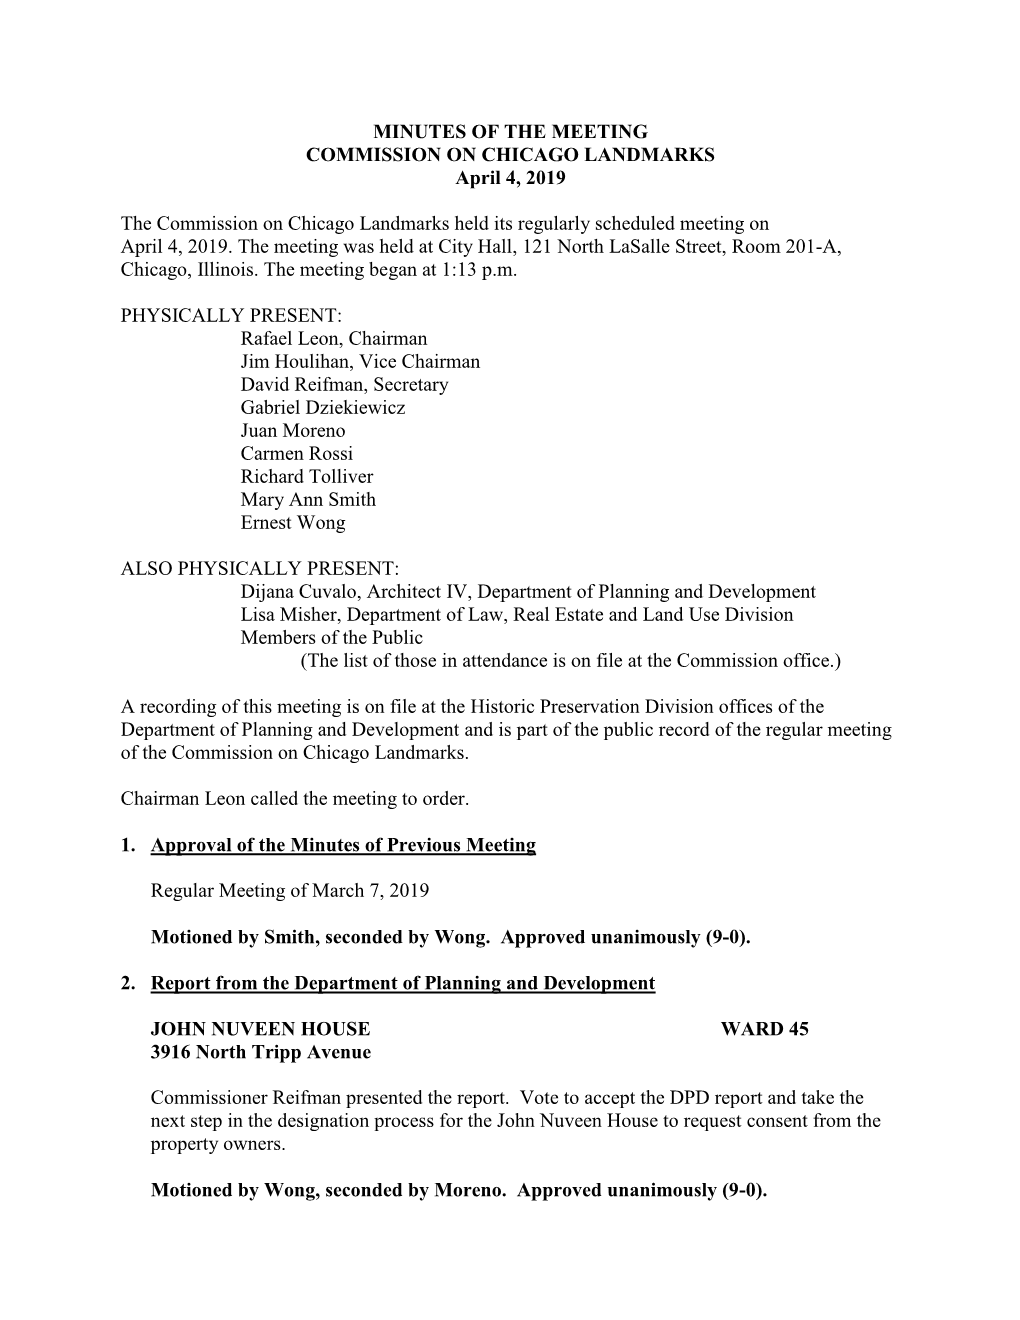 MINUTES of the MEETING COMMISSION on CHICAGO LANDMARKS April 4, 2019